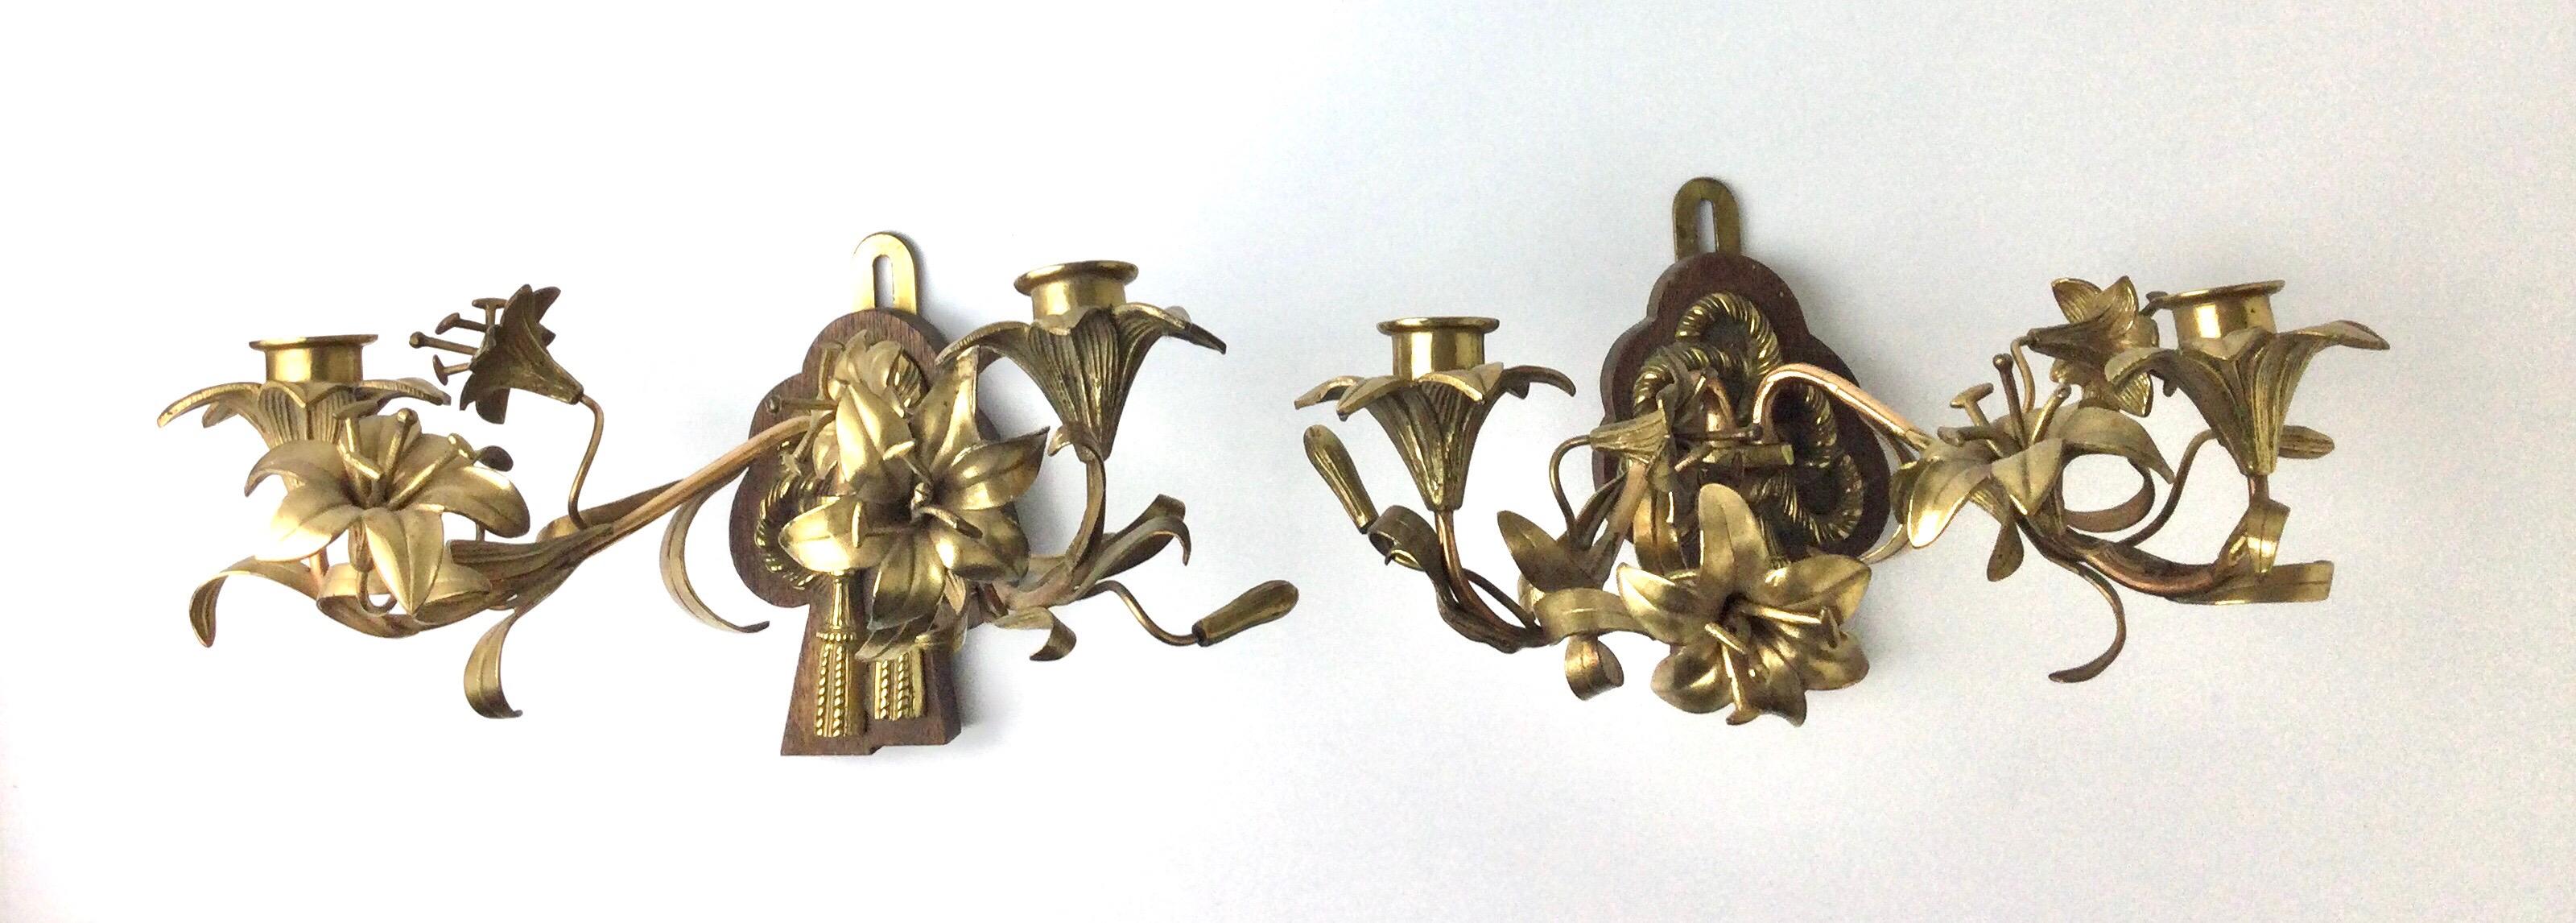 Brass arms with brass flowers mounted on wood bases. Measures: 12